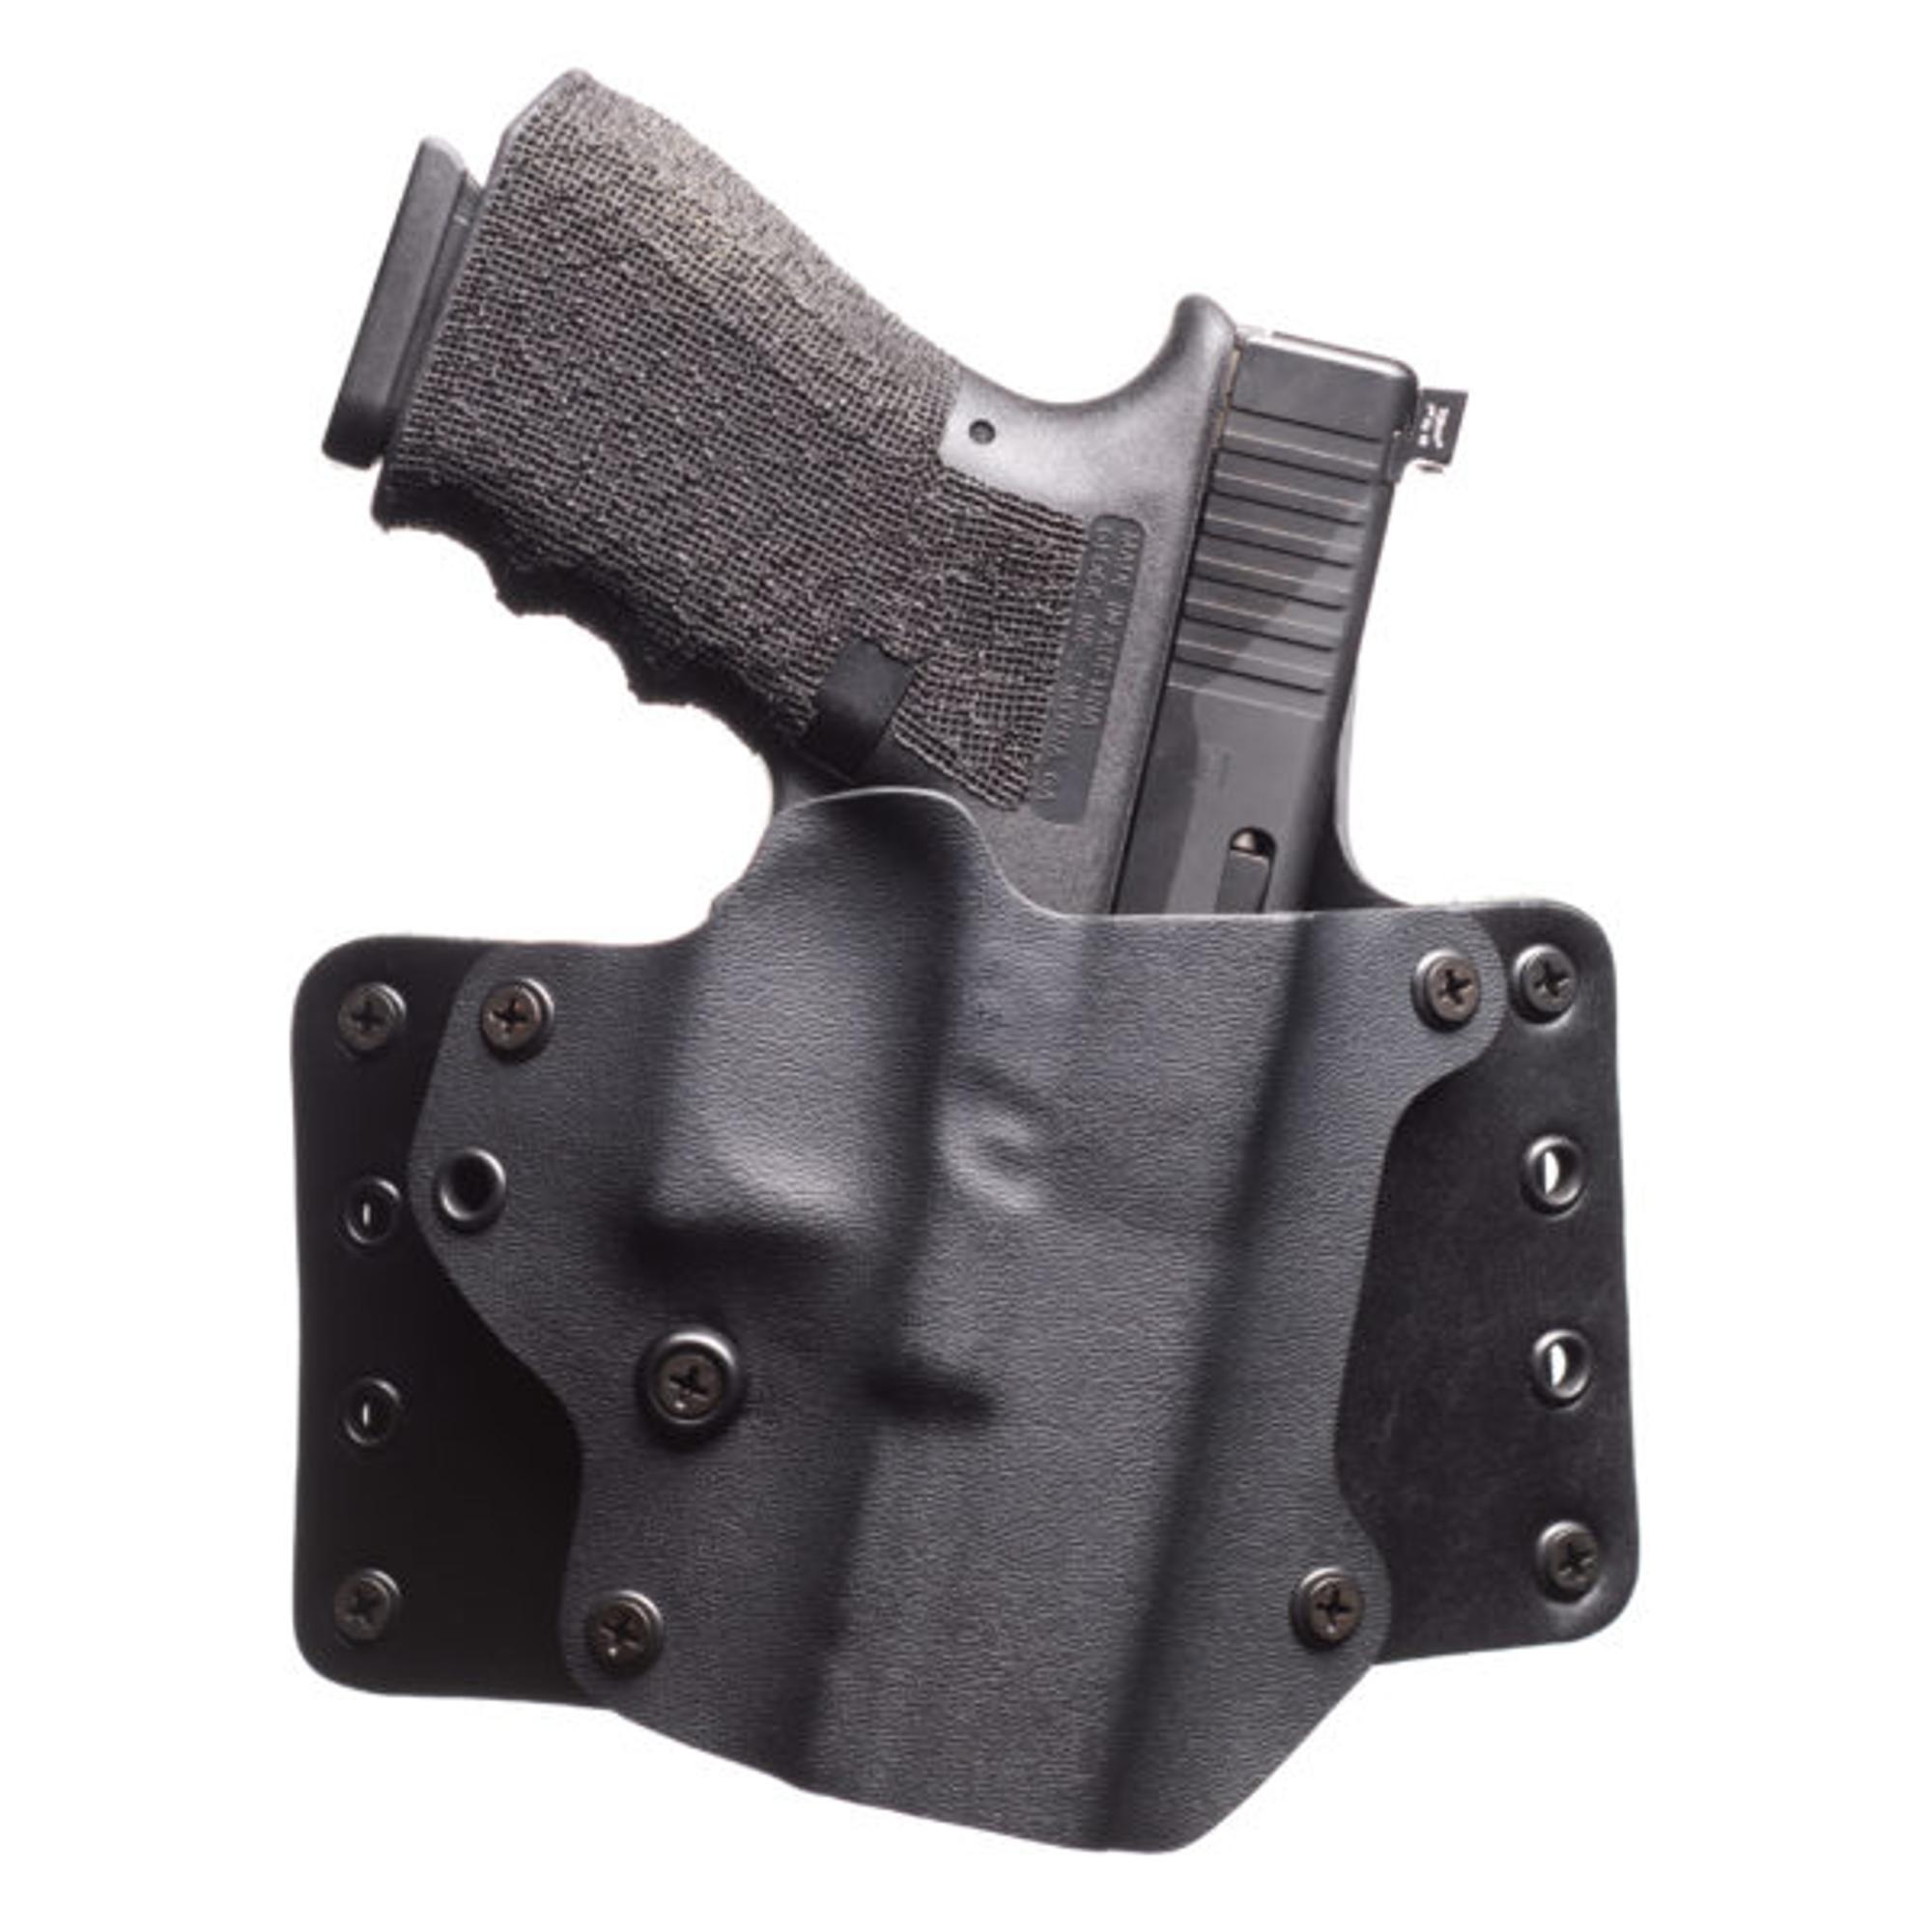 Rh Leather Wing Holster P938 Blk